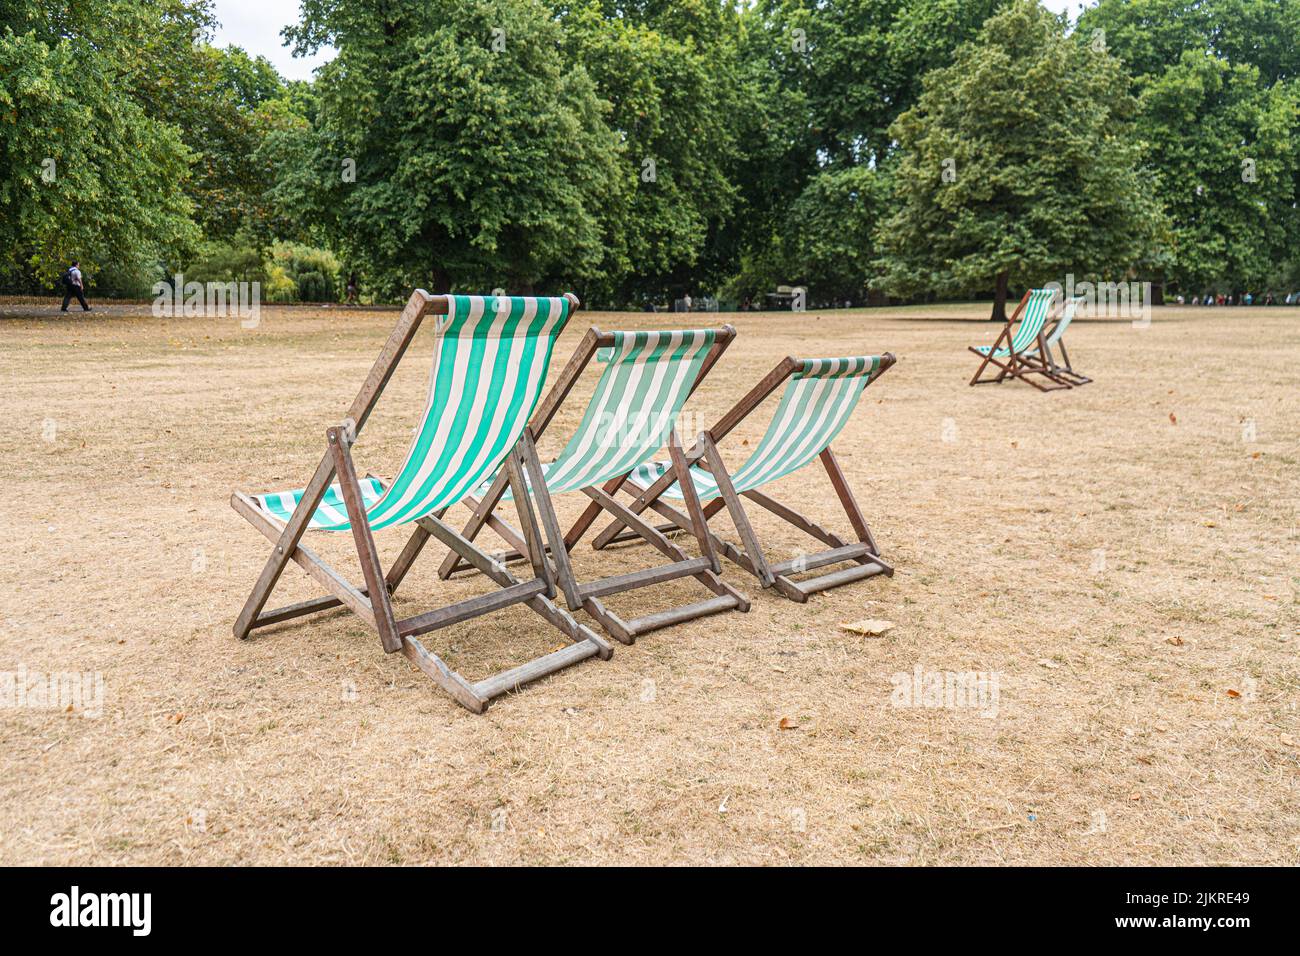 London, UK 3 August 2022. A parched Saint James which would normally be busy lies empty with deckchairs.  A drought warning has been declared after the hottest  july was recorded  and a historic  heatwave caused temperatures to reach 40celsius  and the south east of England  saw an average of 5mm of rain Credit. amer ghazzal/Alamy Live News Stock Photo